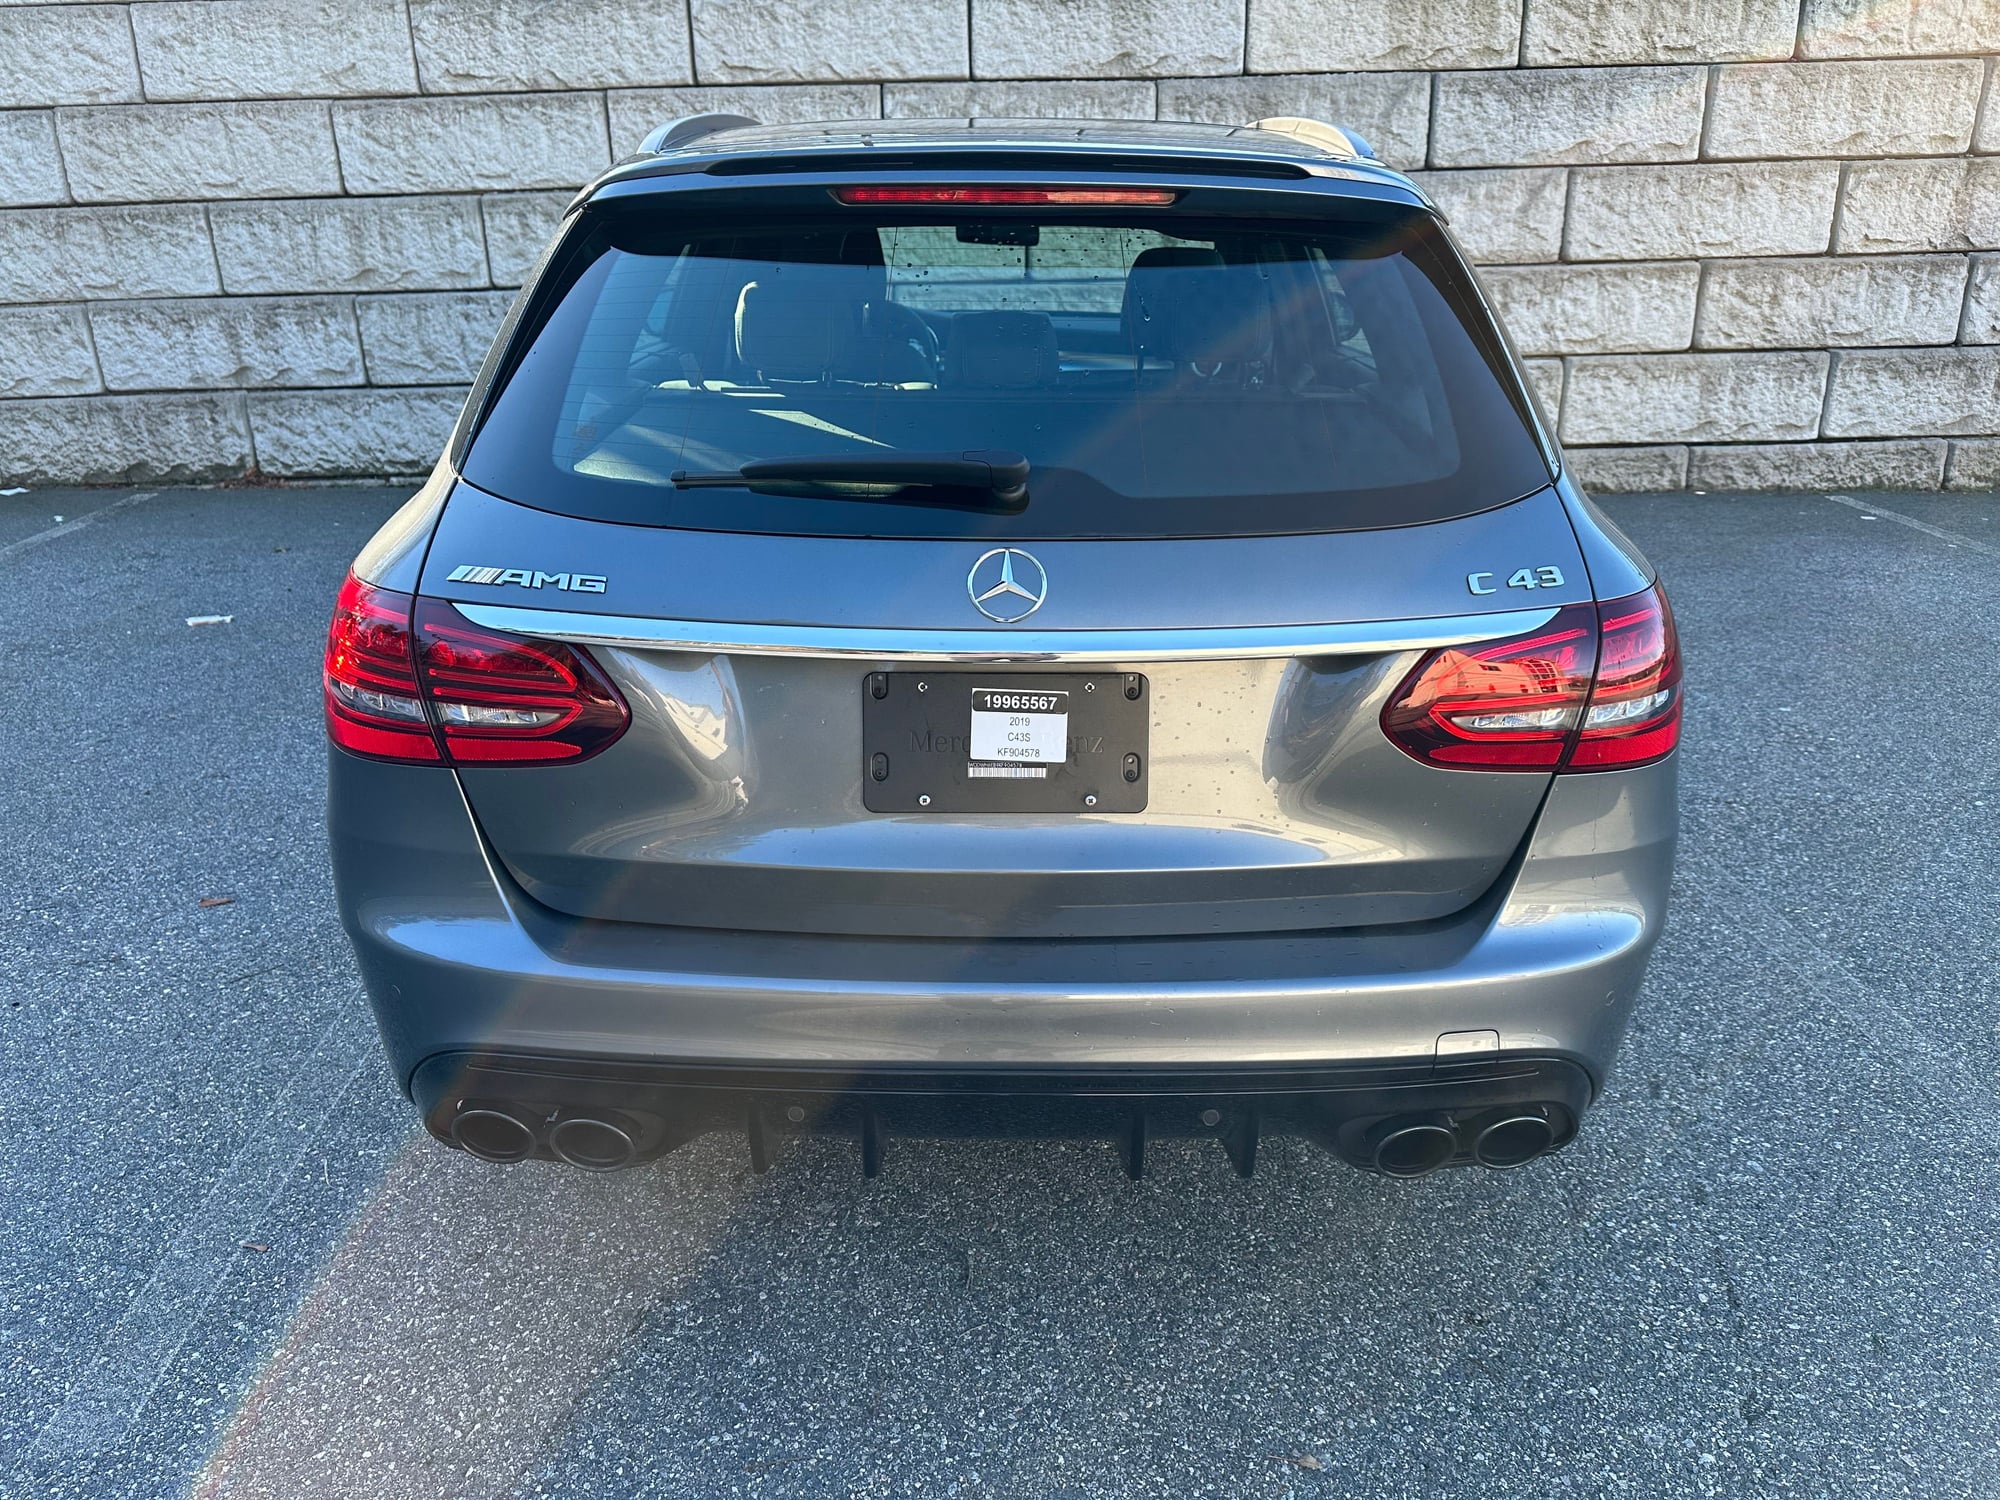 2019 Mercedes-Benz C43 AMG - 2019 C43 AMG WAGON//WAGON/WAGON//FOR SALE IN THE UNITED STATES - Used - VIN WDDWH6EB9KF904578 - 8,512 Miles - 6 cyl - AWD - Automatic - Wagon - Gray - Chelsea, MA 02150, United States